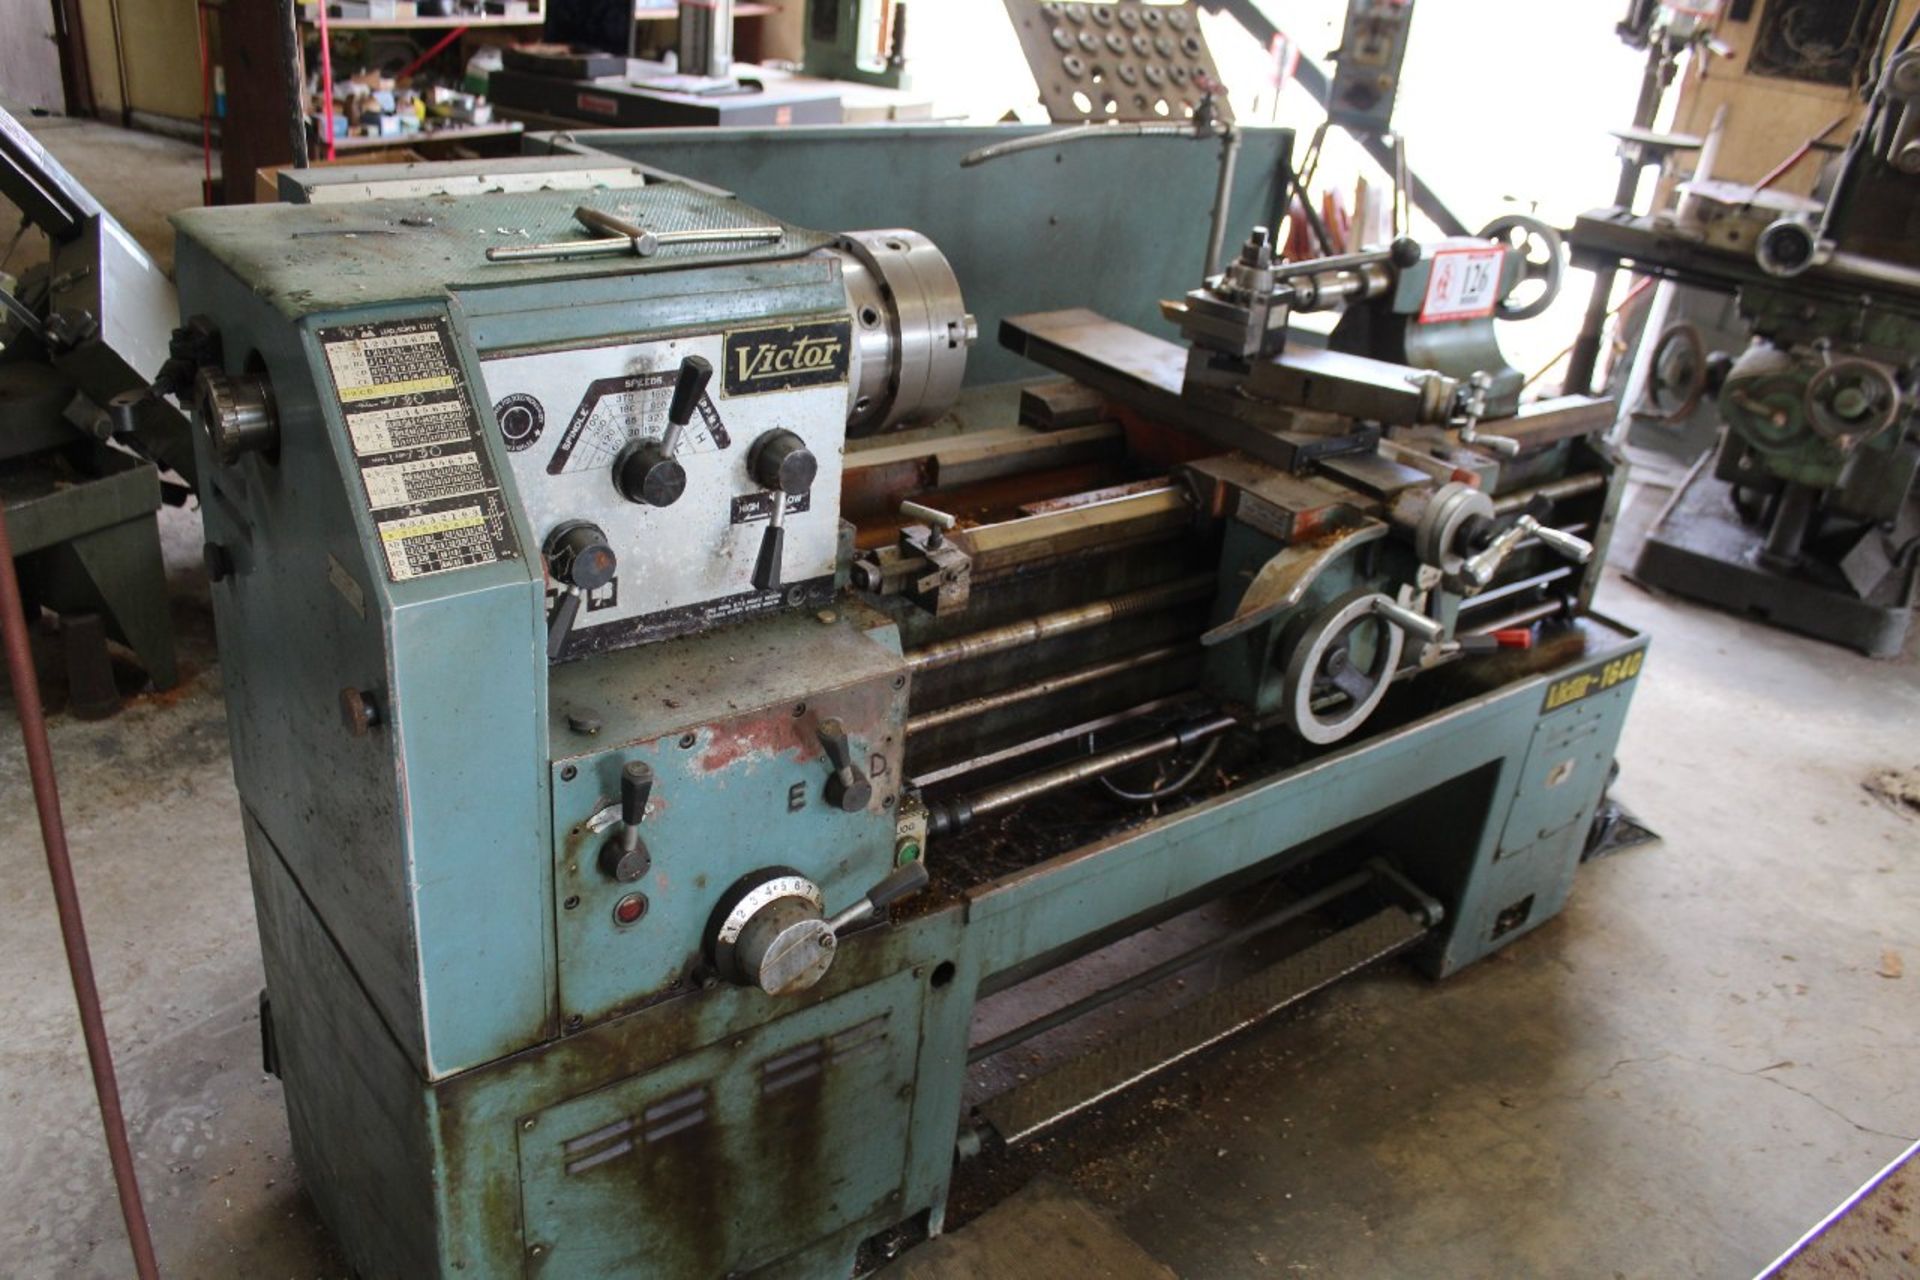 Victor Engine Lathe 1640 16 inch Swing, 40 inch between centers